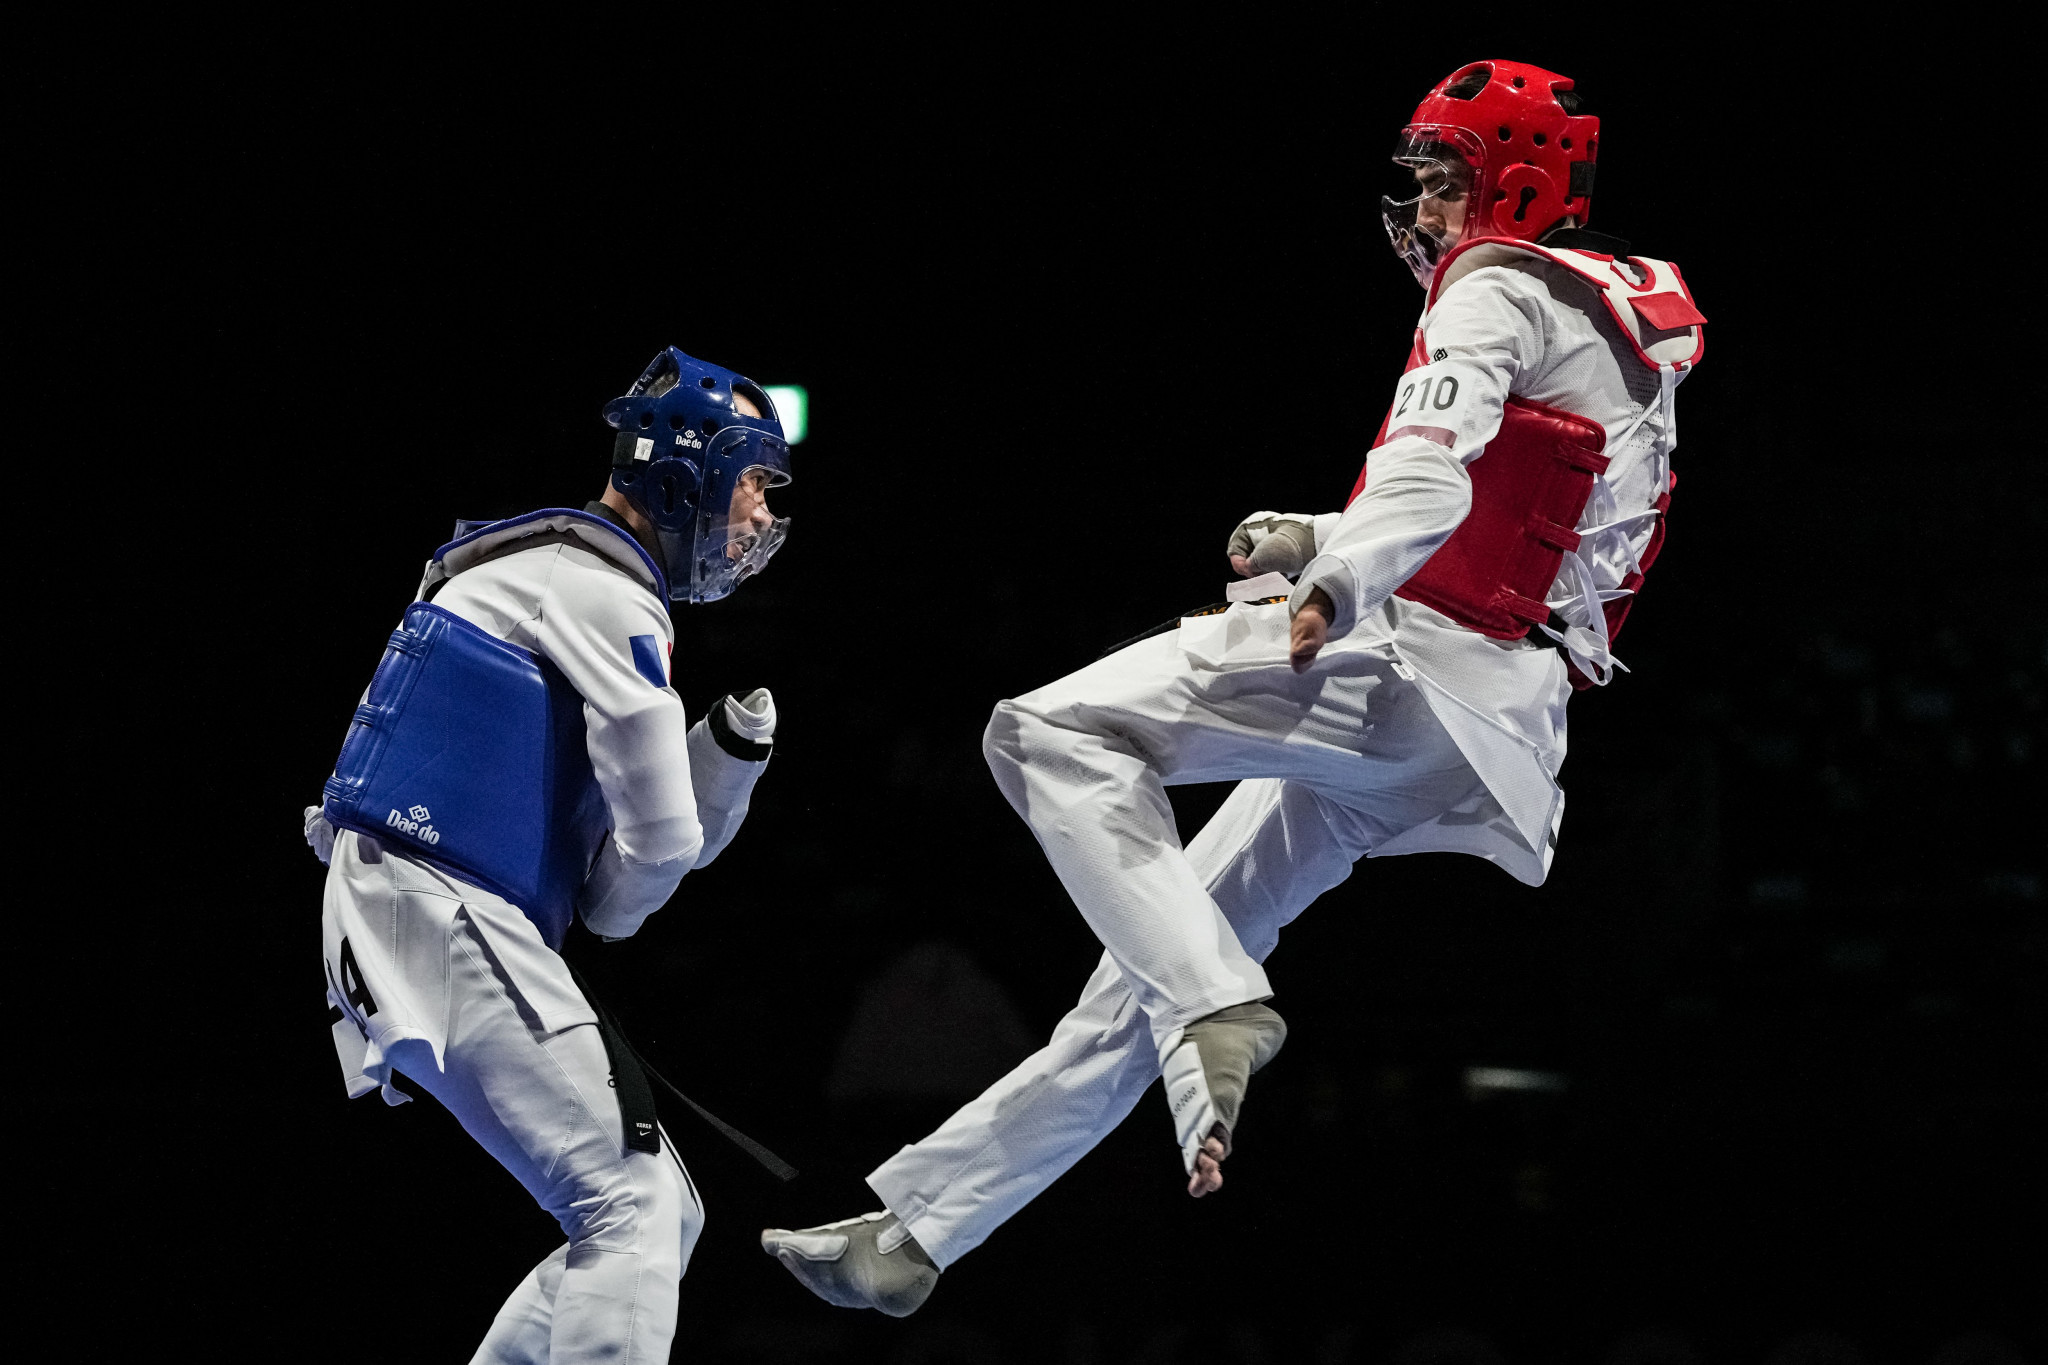 France relaunches taekwondo programme to find next generation of stars